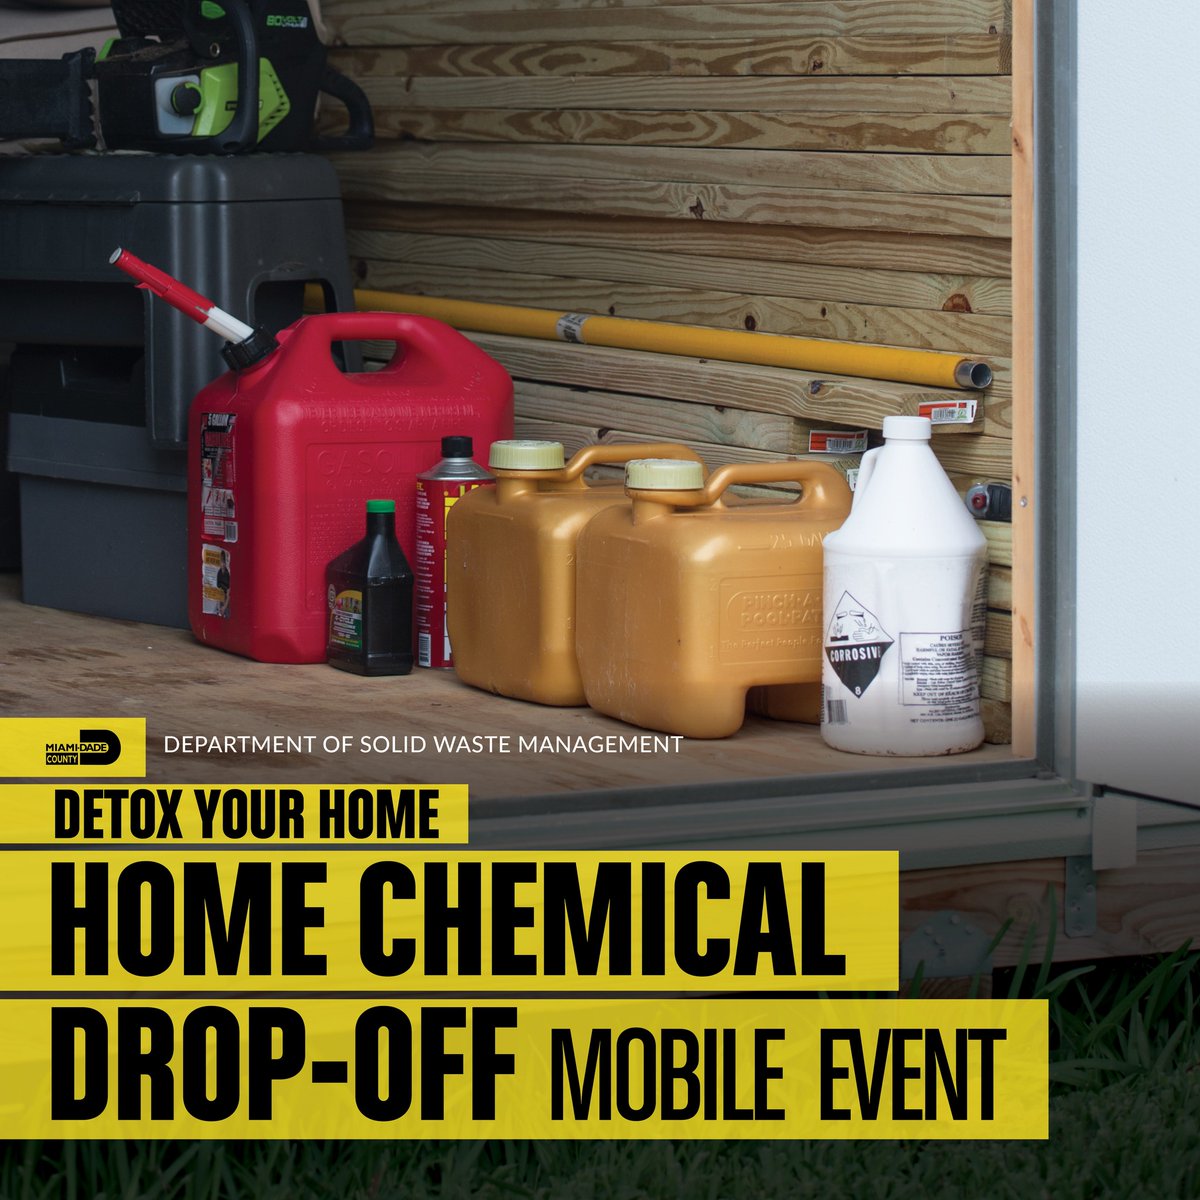 On Saturday, May 18th, you can bring your household chemical items and old electronics to our Home Chemical Drop-Off Mobile Event at our Sunset Kendall TRC. For more information about the Home Chemical Drop-Off Mobile Events click below. miamidade.gov/global/release… #DetoxYourHome